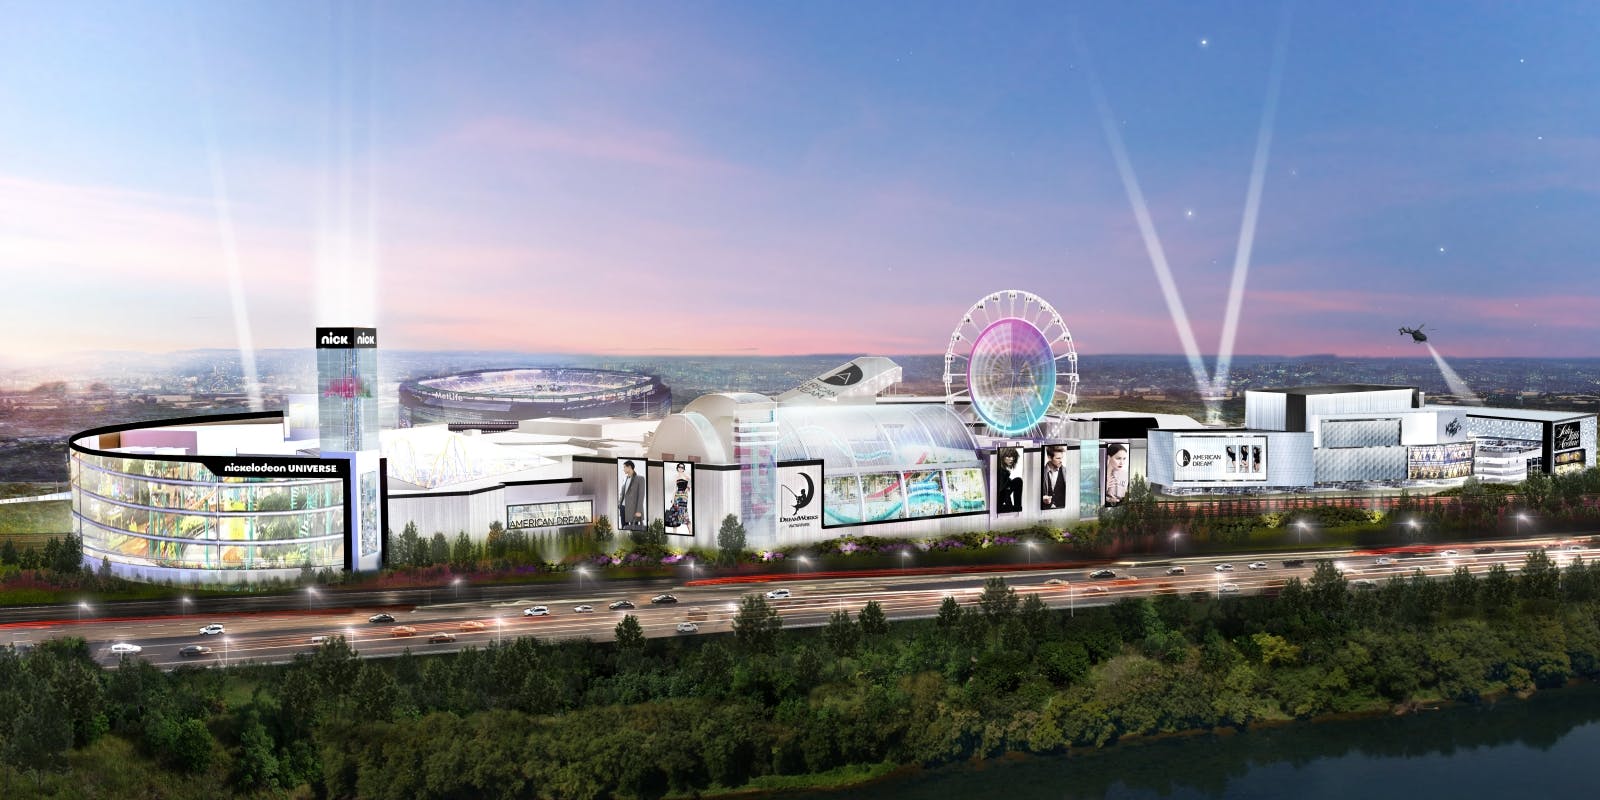 New Jersey&#39;s long-delayed American Dream mega-mall set to open | News | Archinect